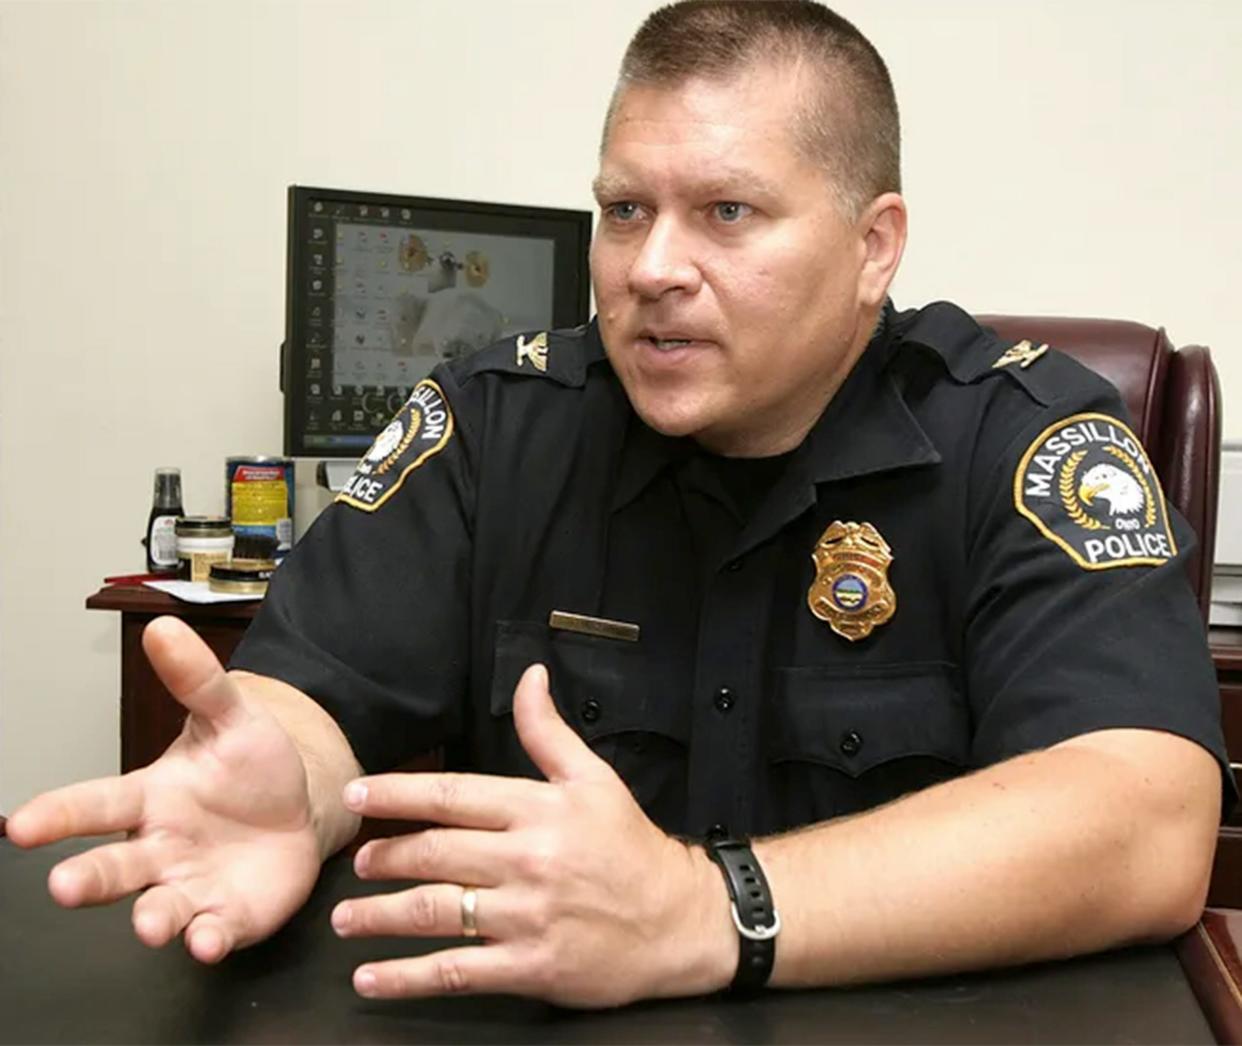 Massillon Police Chief Keith Moser is slated to retire July 17. He has served more than 10 years as the city's head of police.